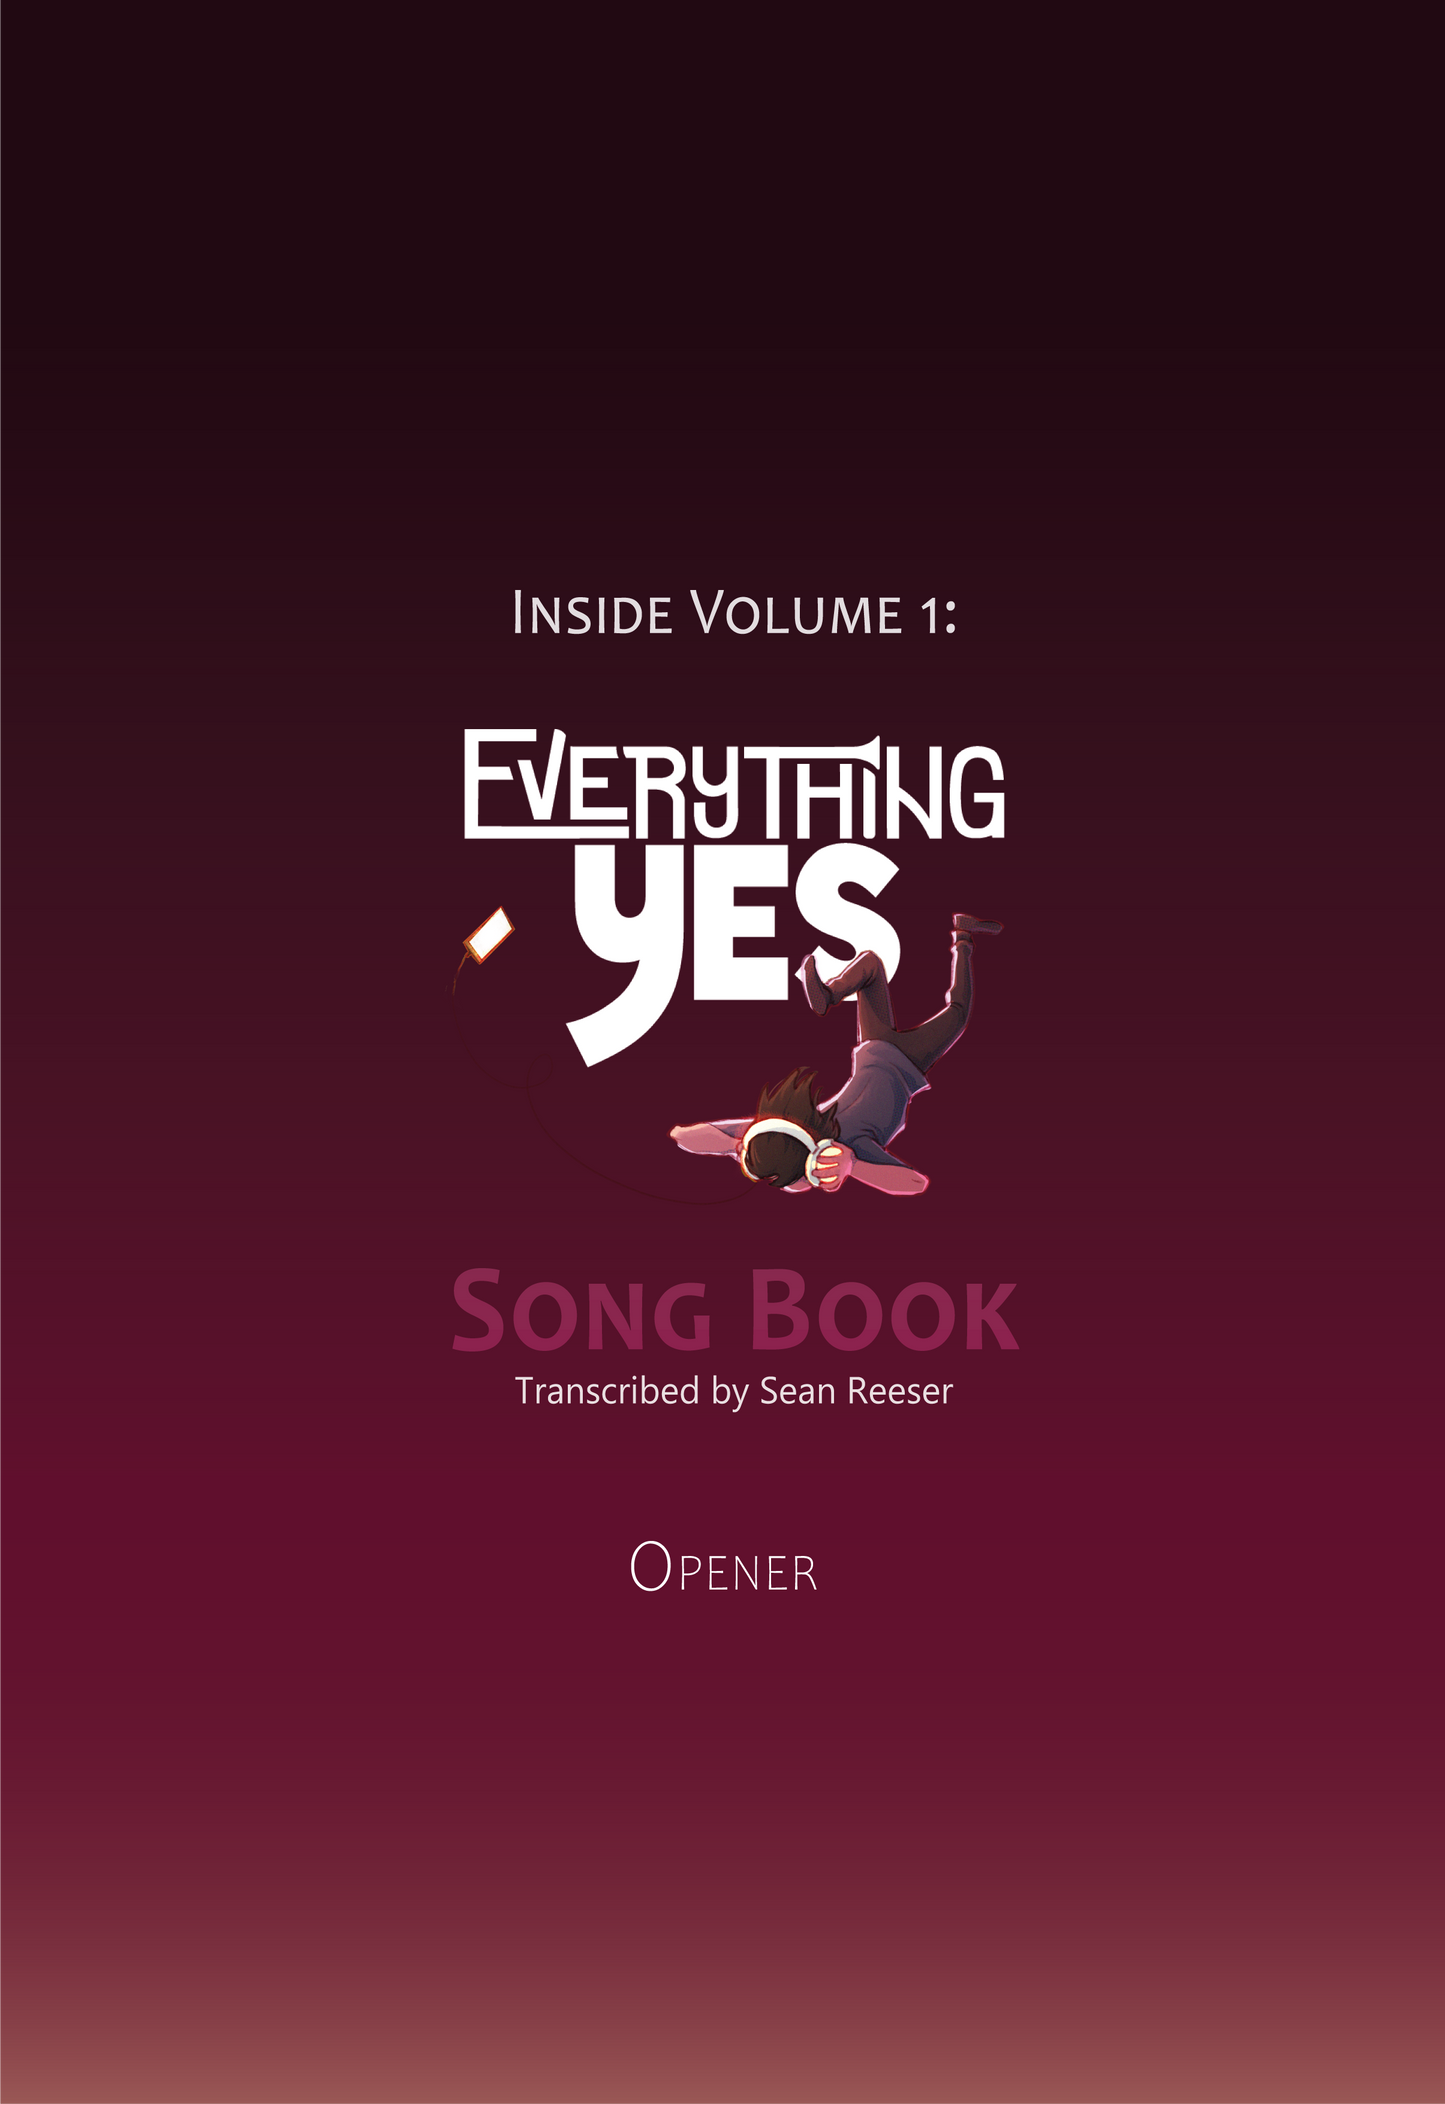 VOLUME 1 - OPENER - Everything Yes Song Book